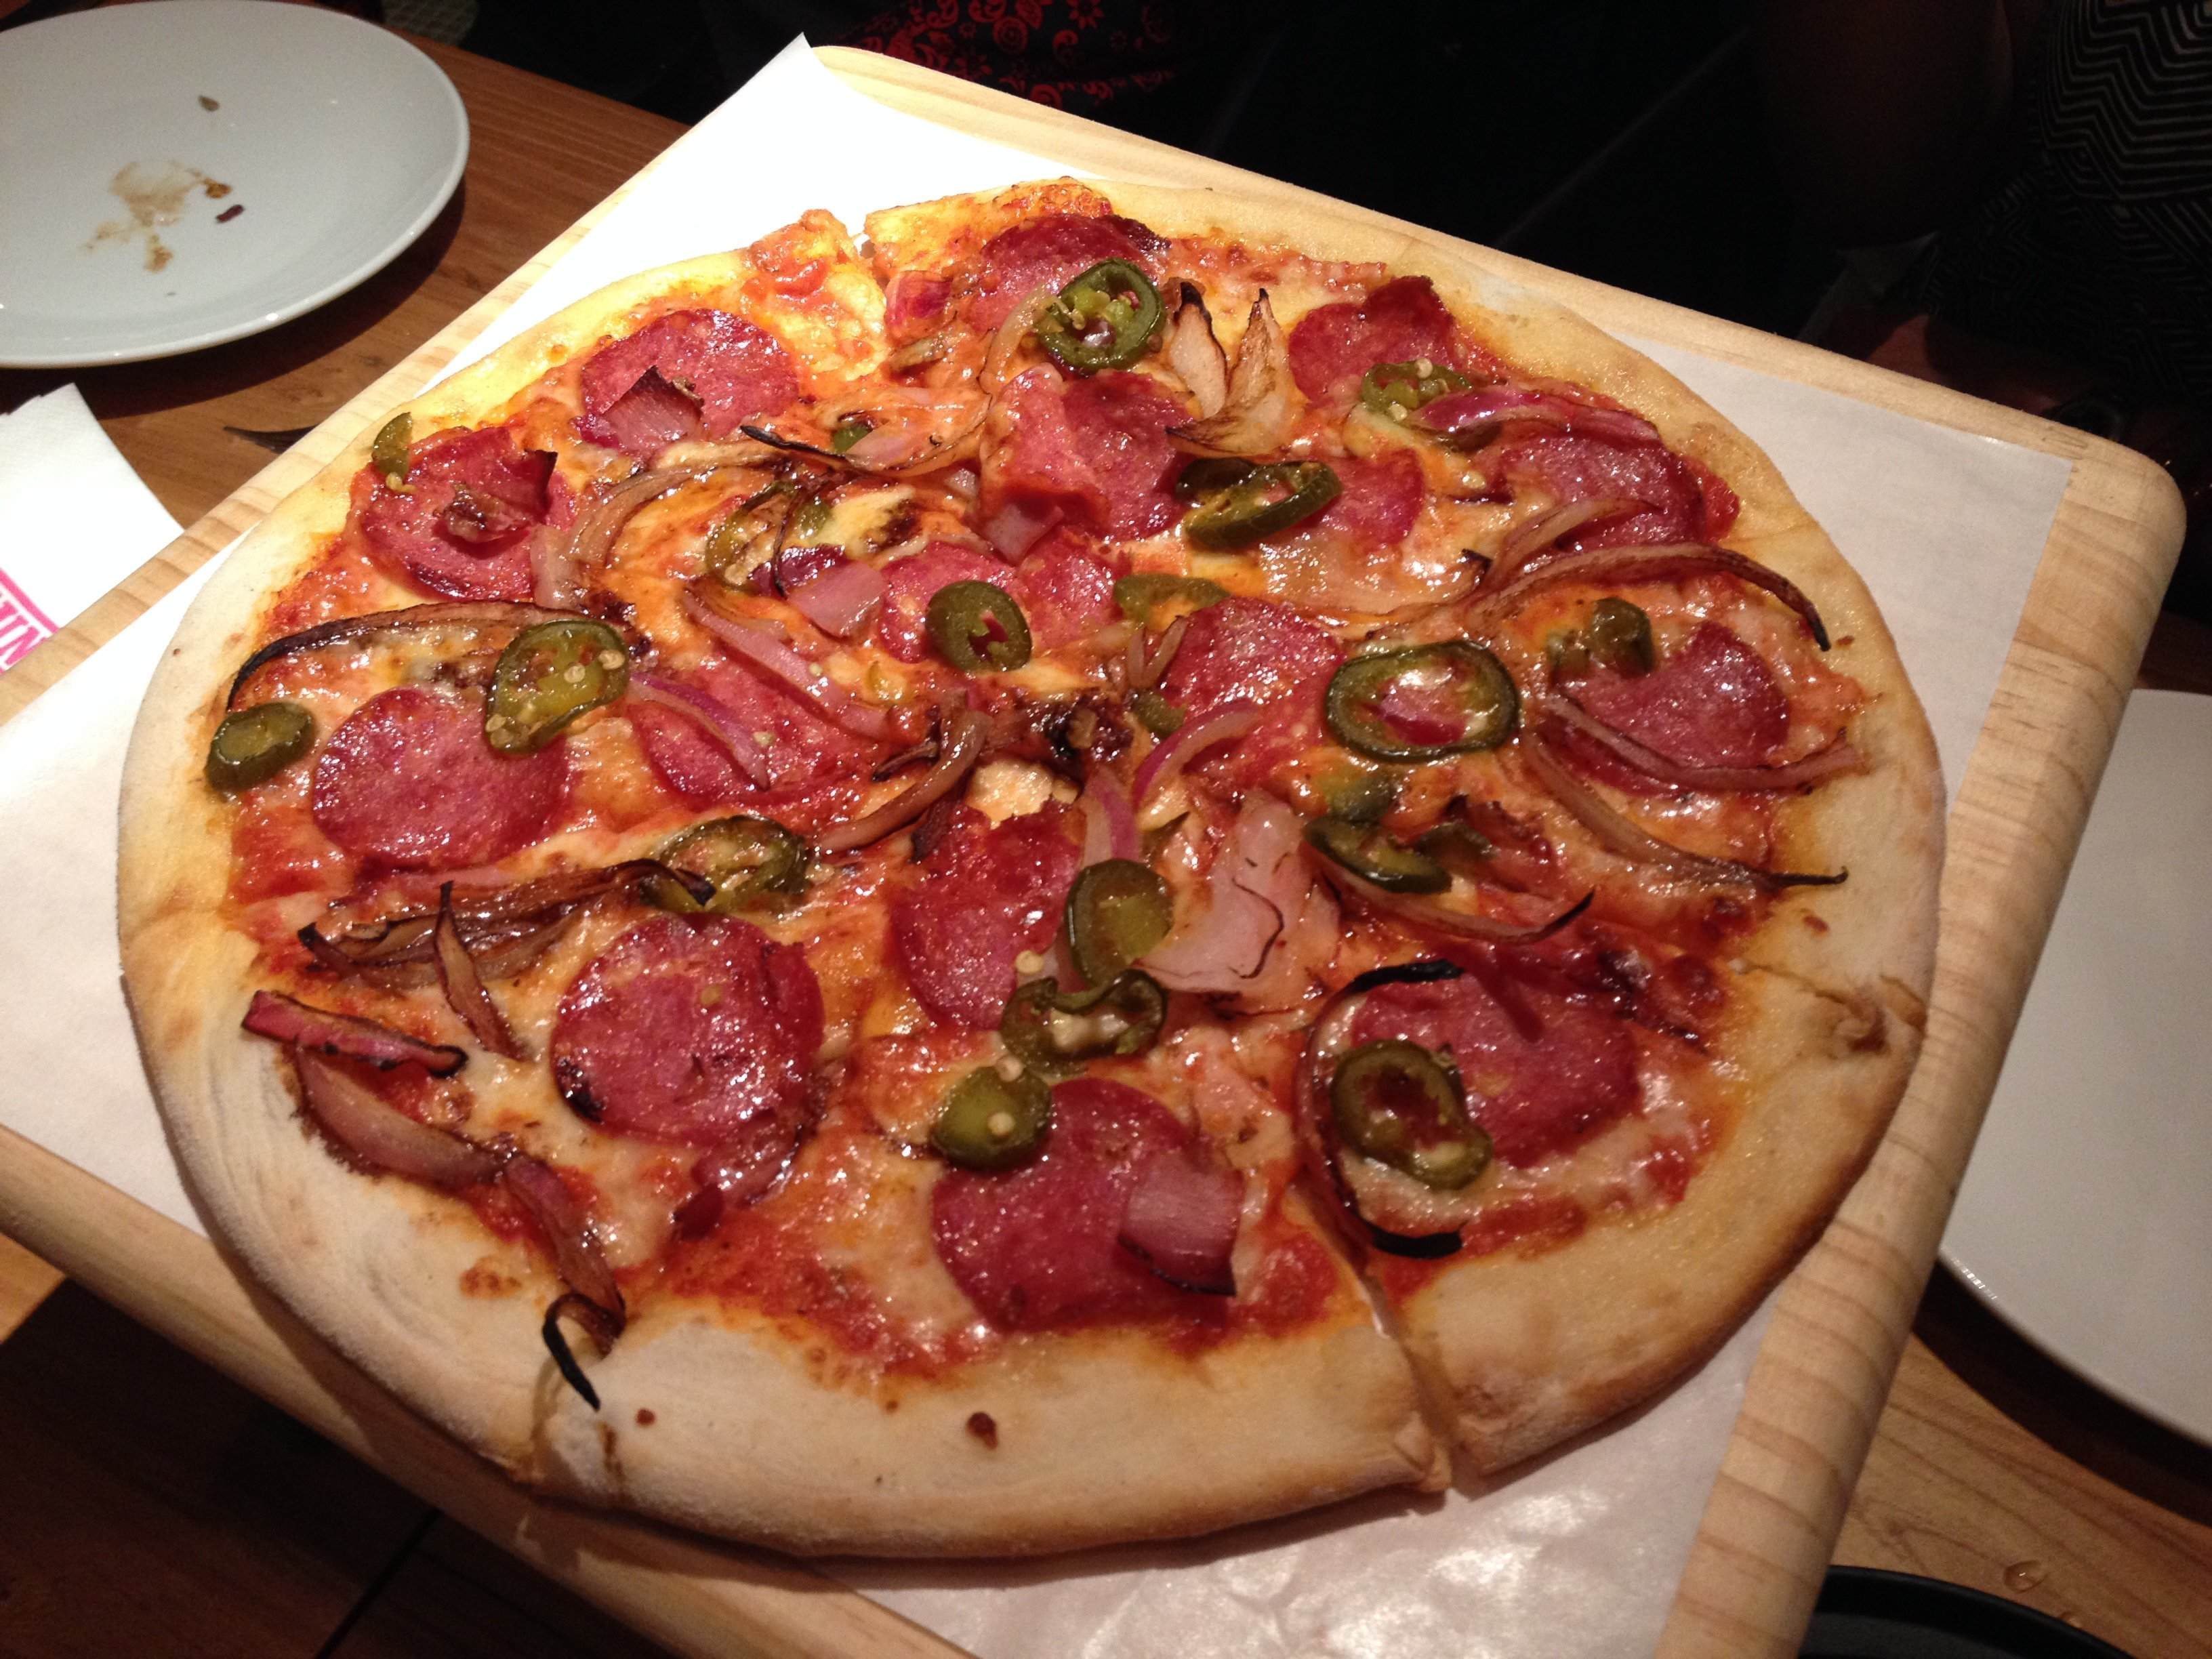 Gung Ho! Pizza Charges Back With New Menu, Moves Towards Sit-Down Dining